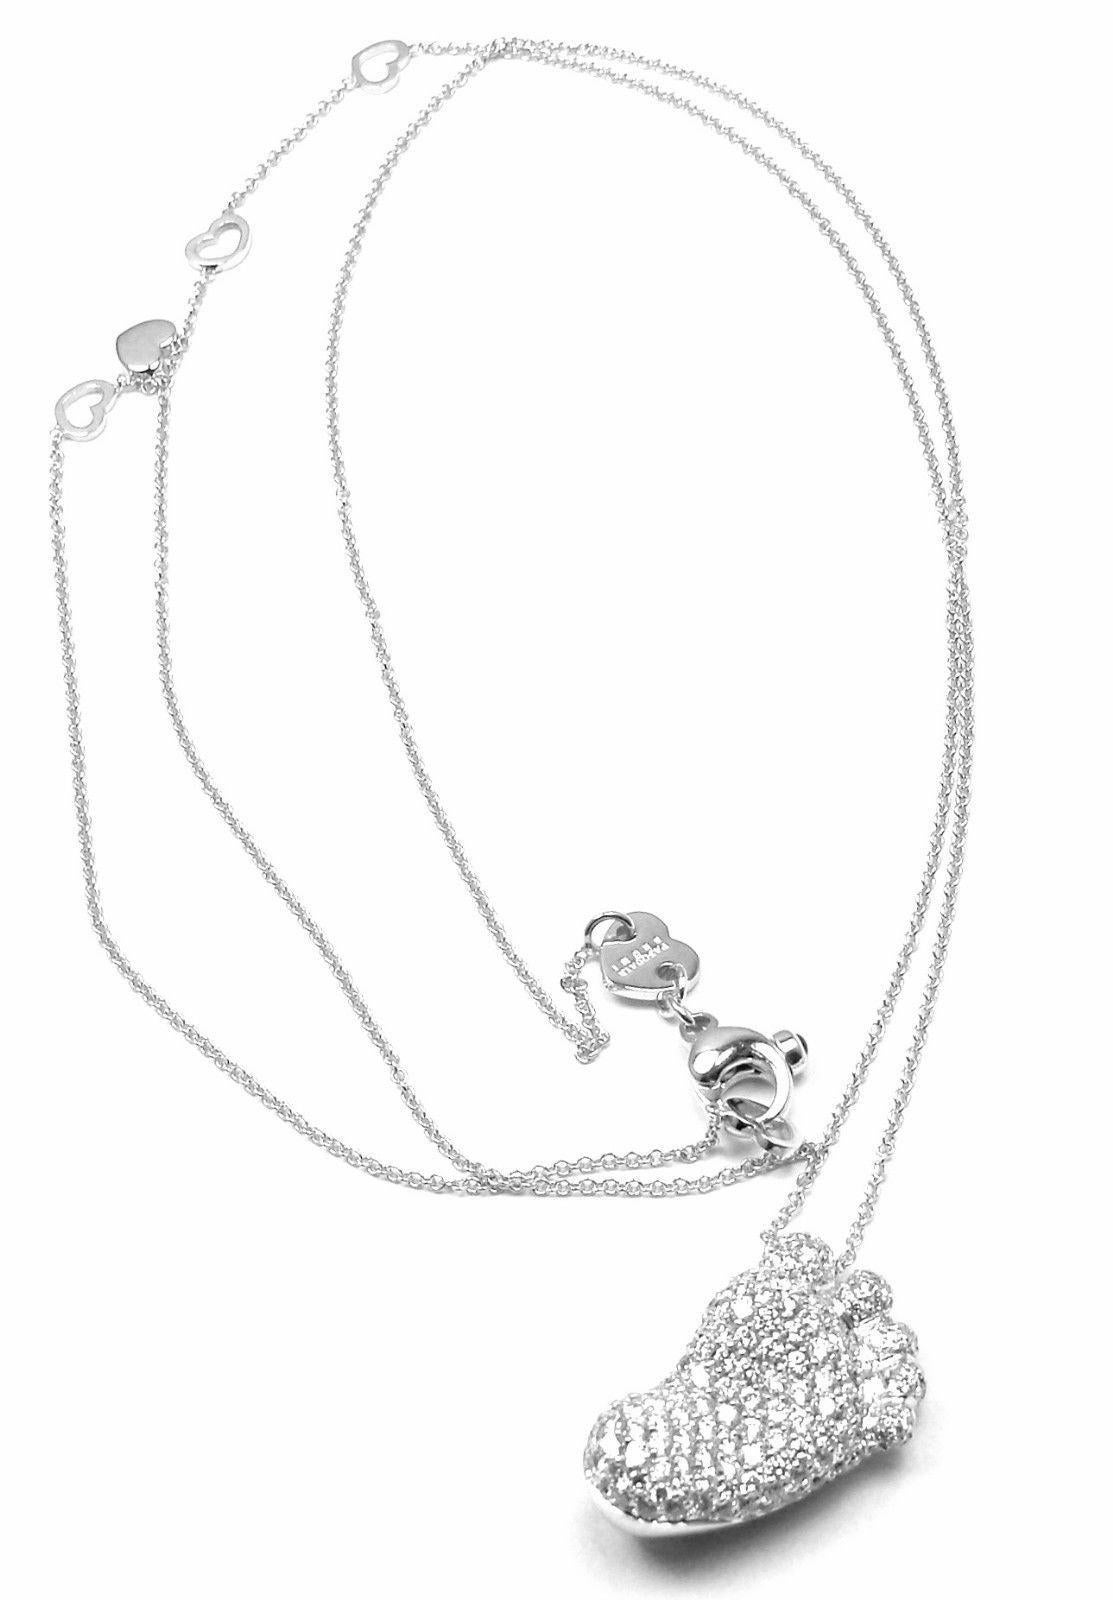 Women's or Men's Pasquale Bruni ORME Footsteps Diamond Foot White Gold Pendant Necklace For Sale